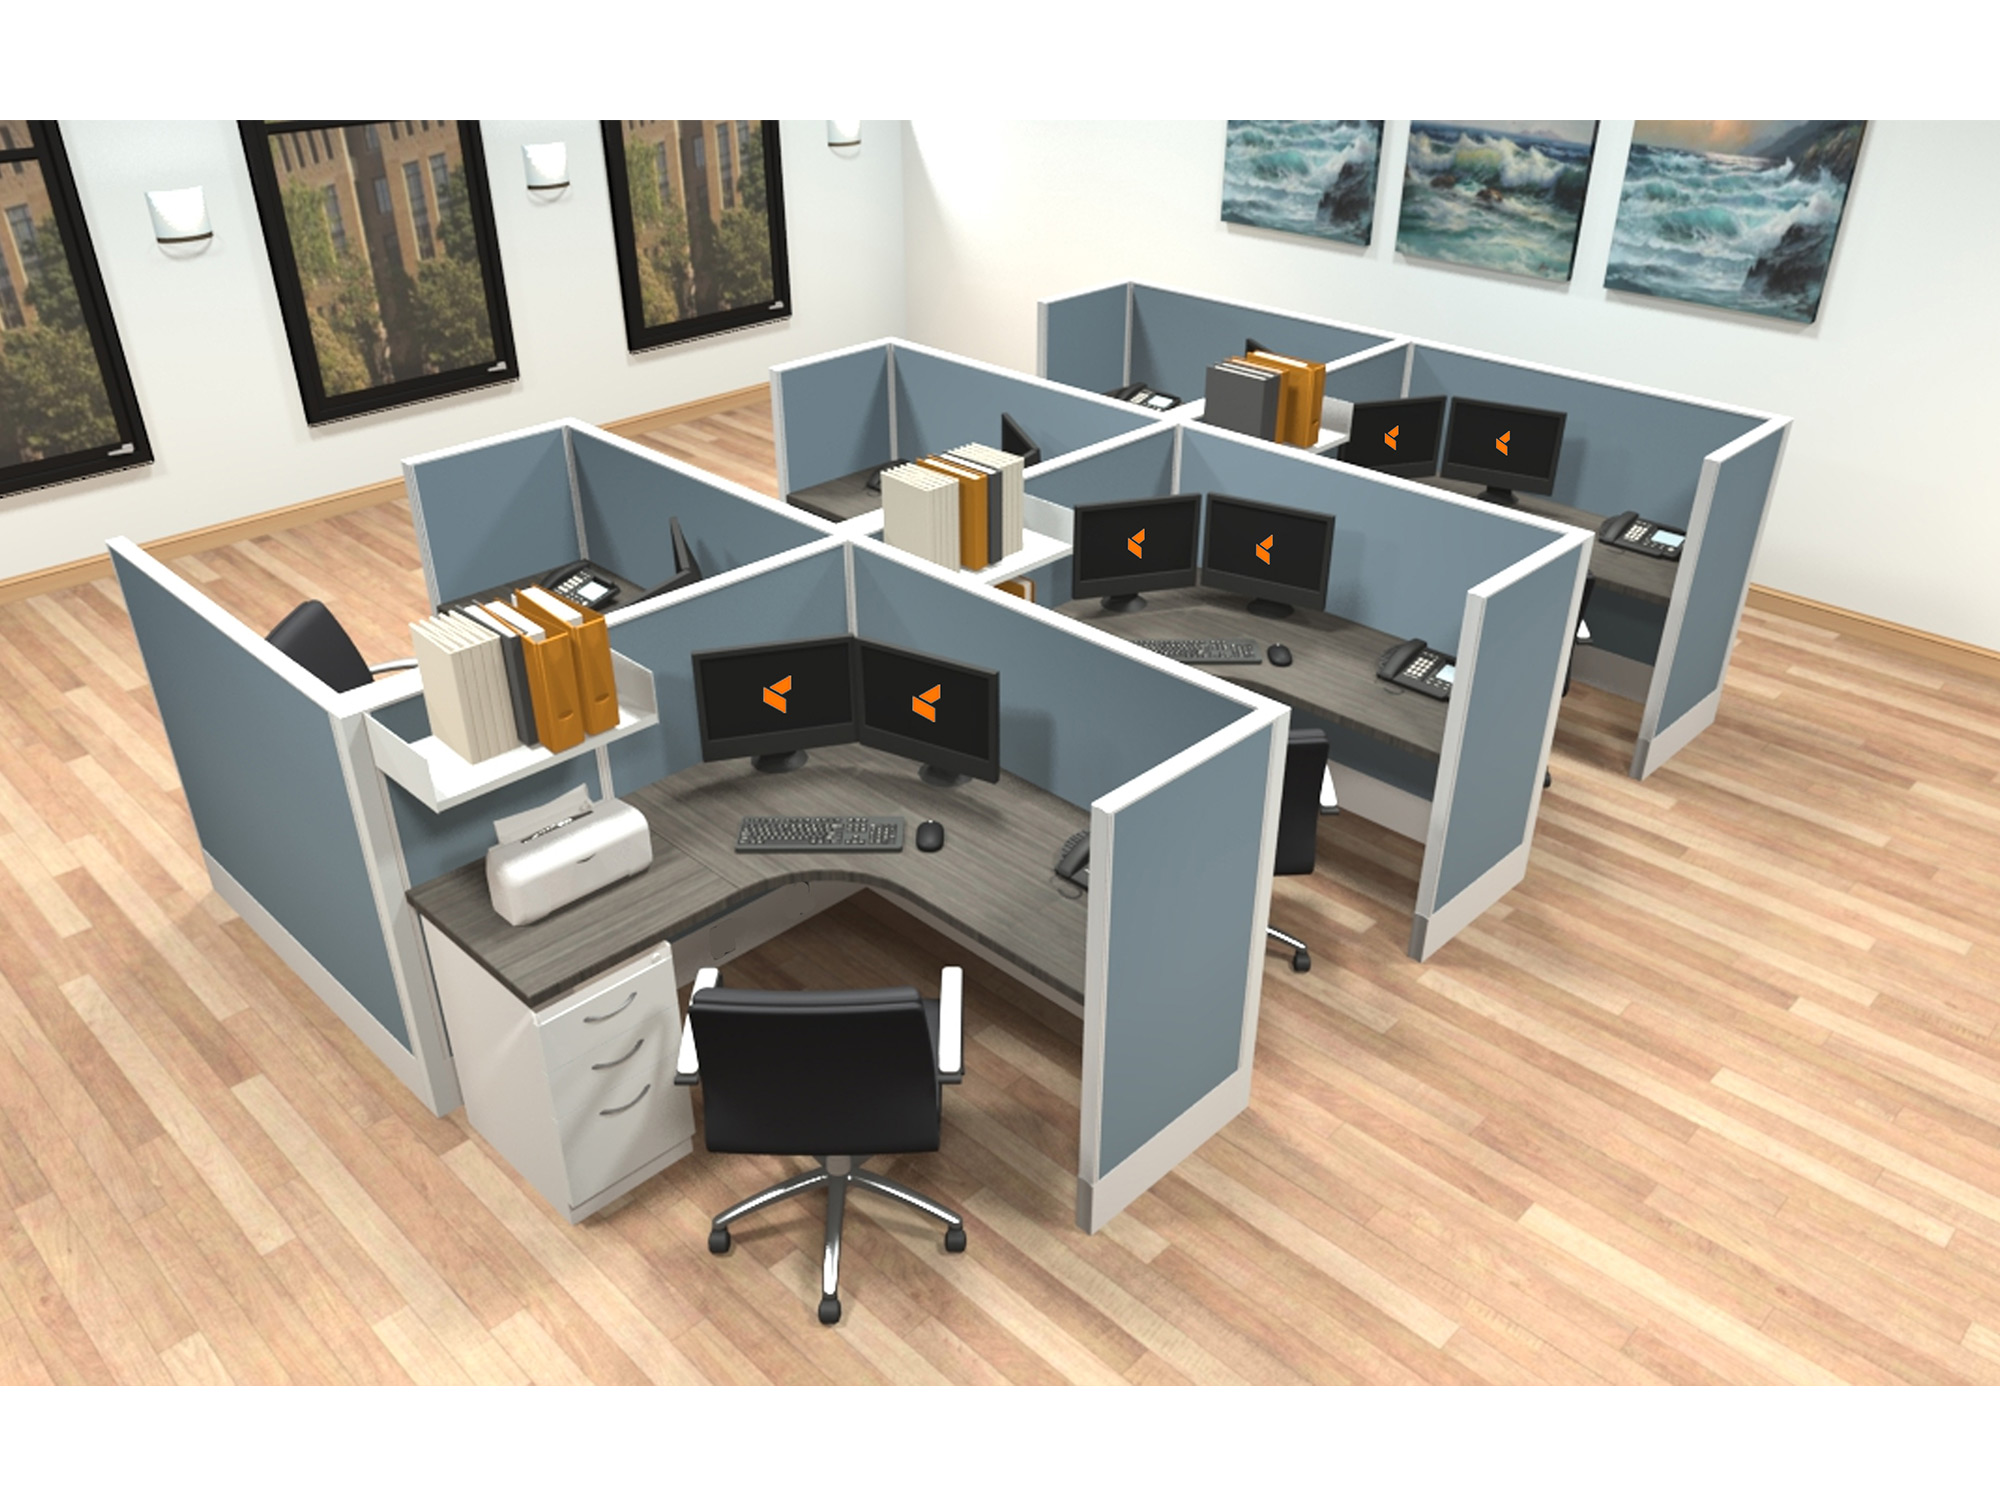 5x5 modular workstations from AIS - 6 Pack Cluster